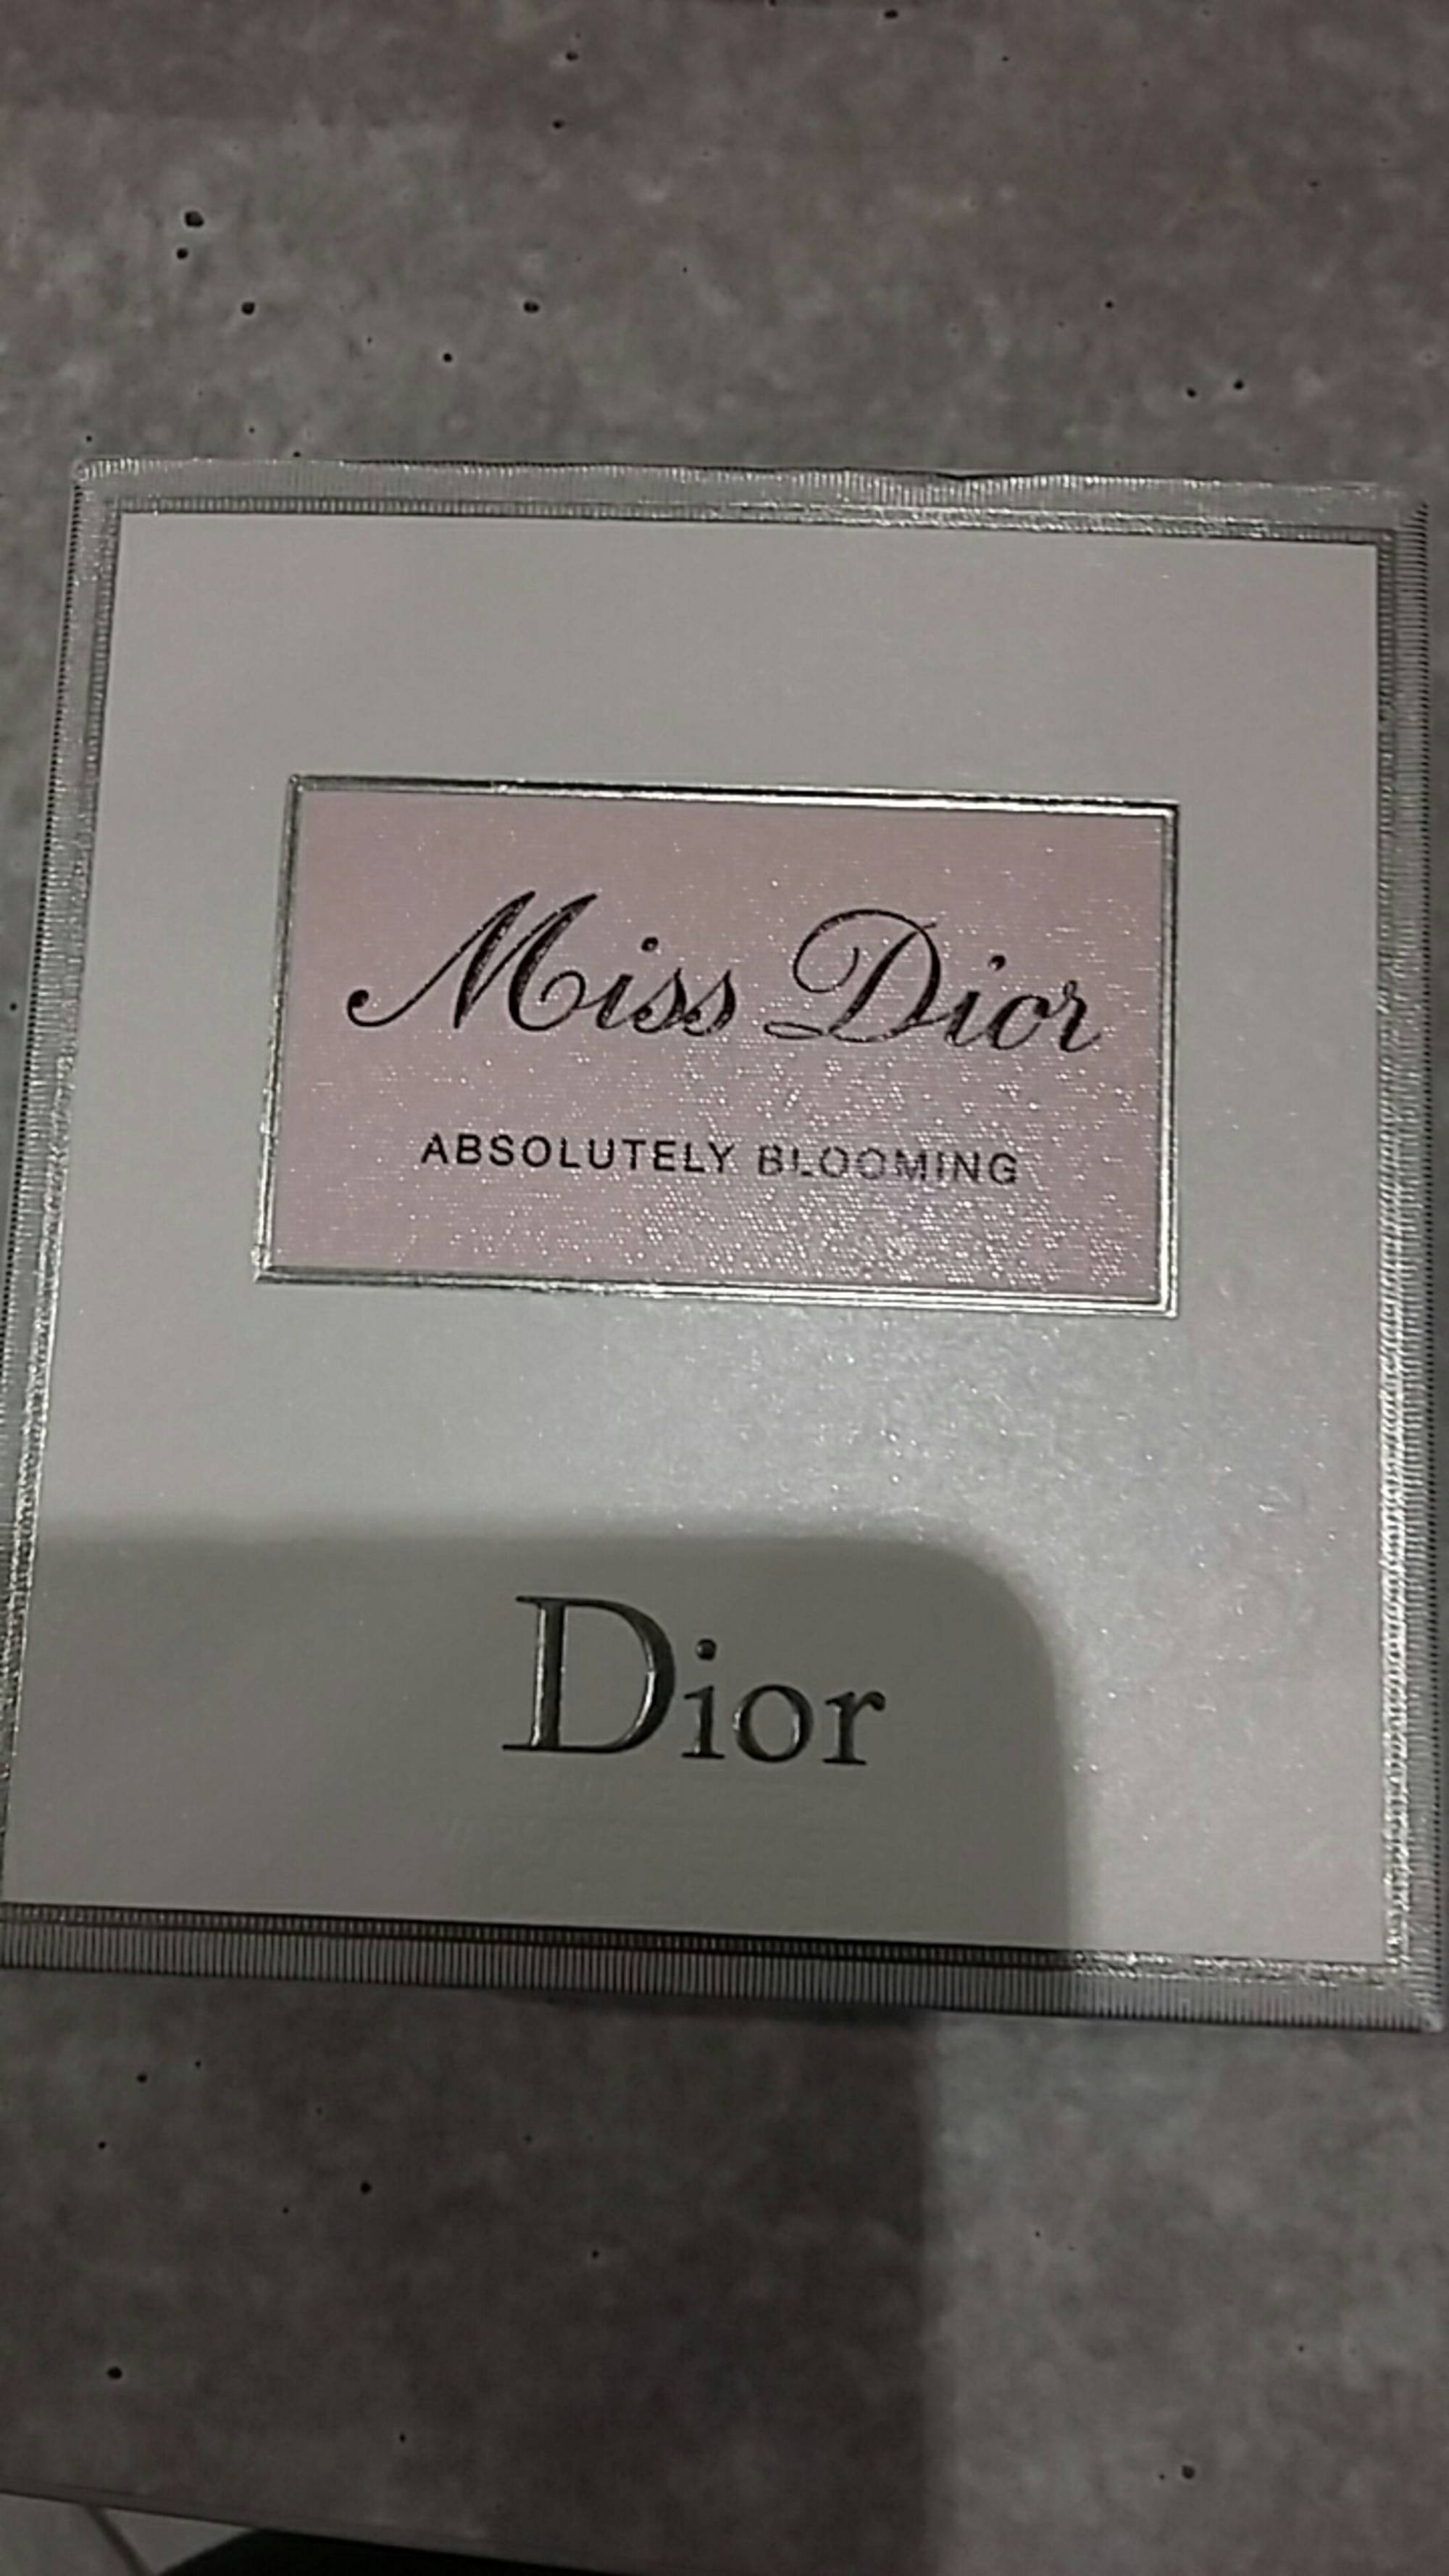 DIOR - Miss dior - Absolutely blooming